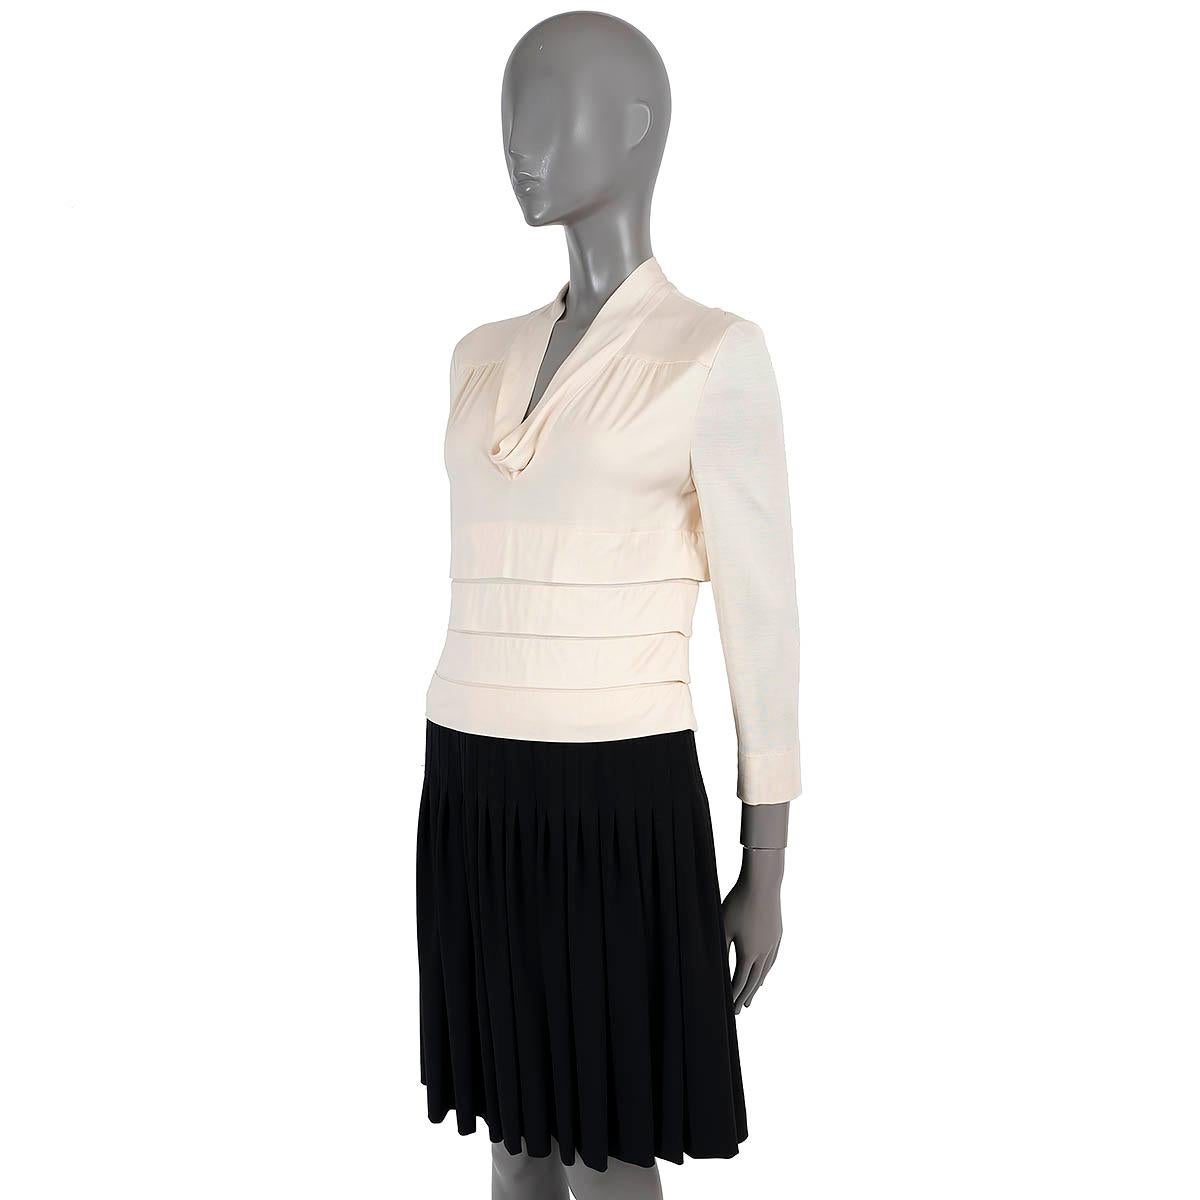 100% authentic Chanel colorblock dress. Features a cream top in jersey silk (100%) with cowl neck and pleated details and a black pleated skirt in wool (100%). Opens with a concealed zipper in the back and is lined in silk (100%). Has been worn and